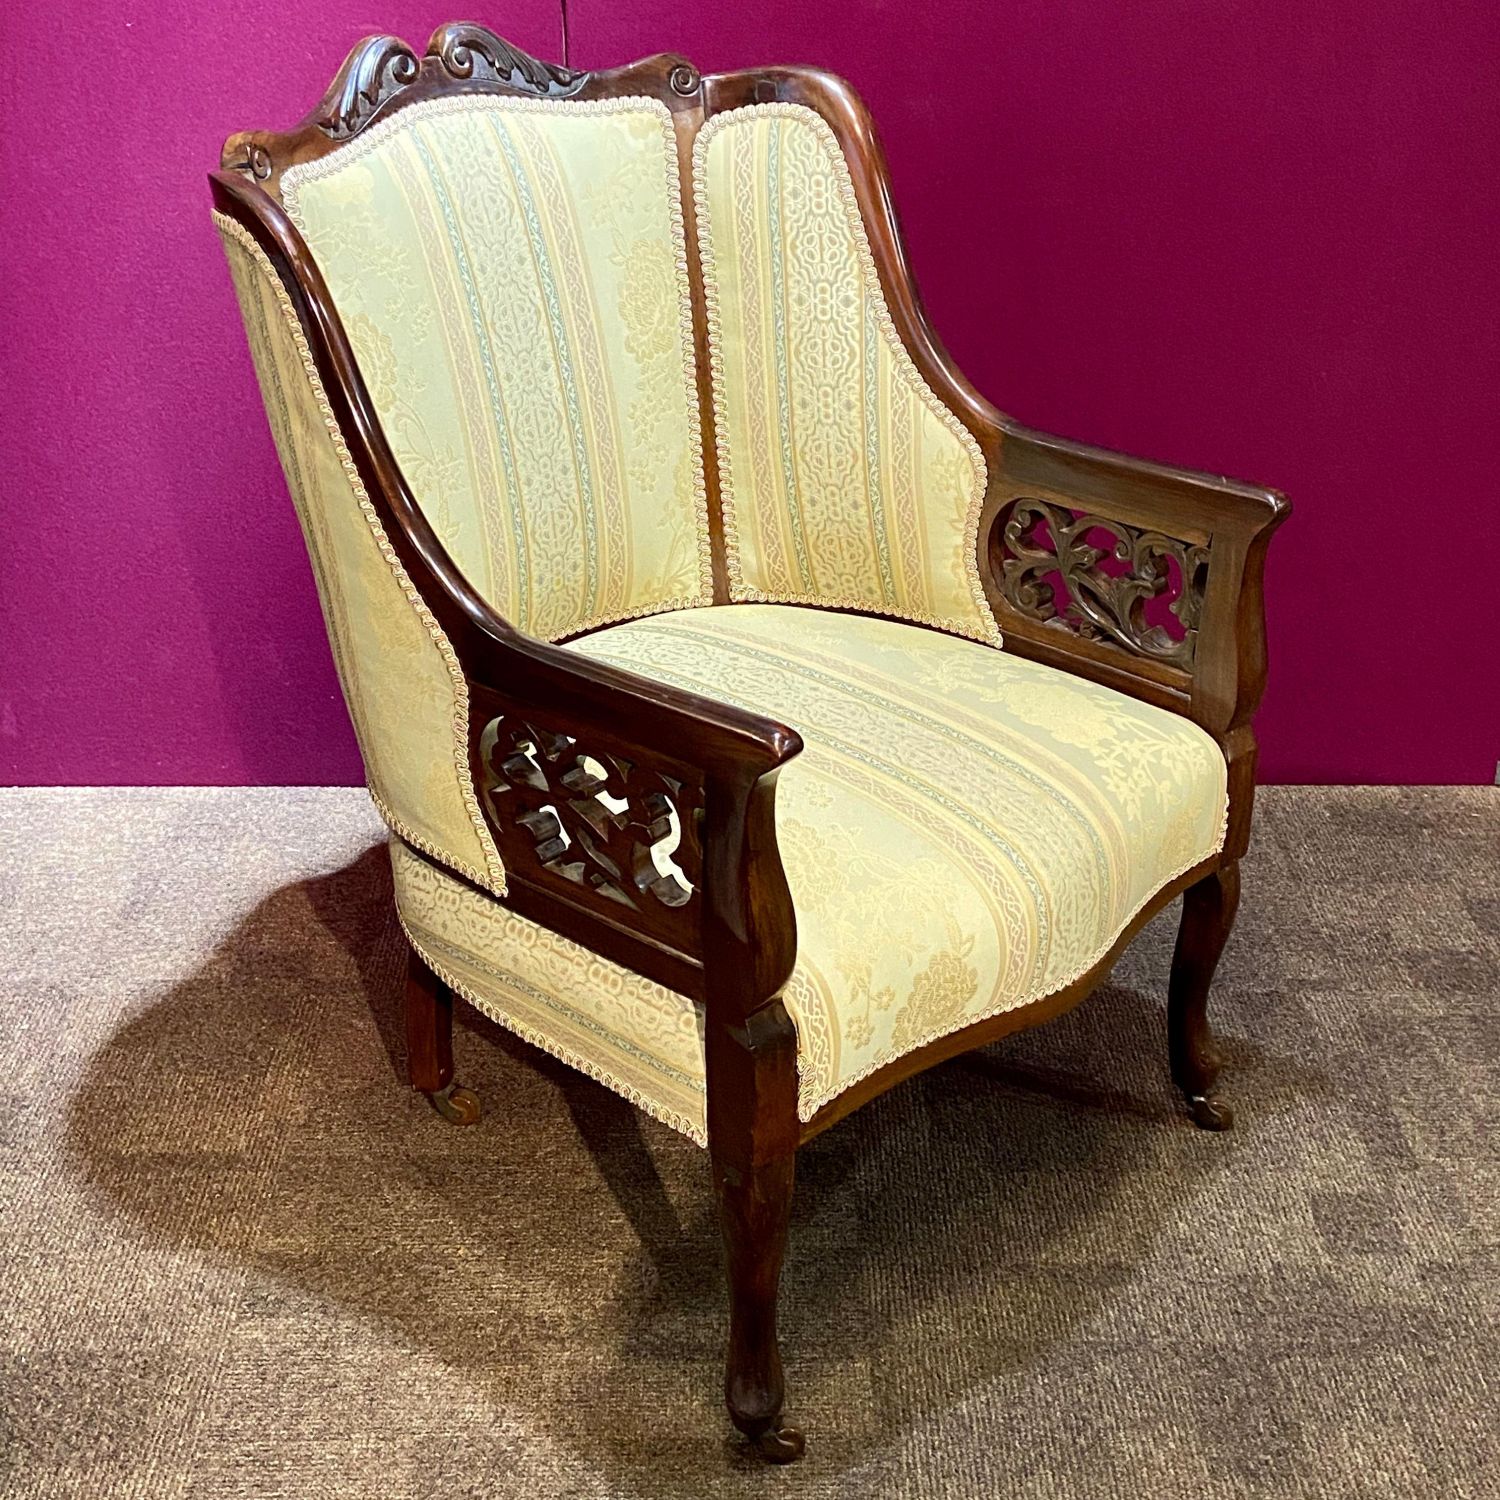 Mahogany Edwardian Salon Type Chair - Antique Chairs - Hemswell Antique